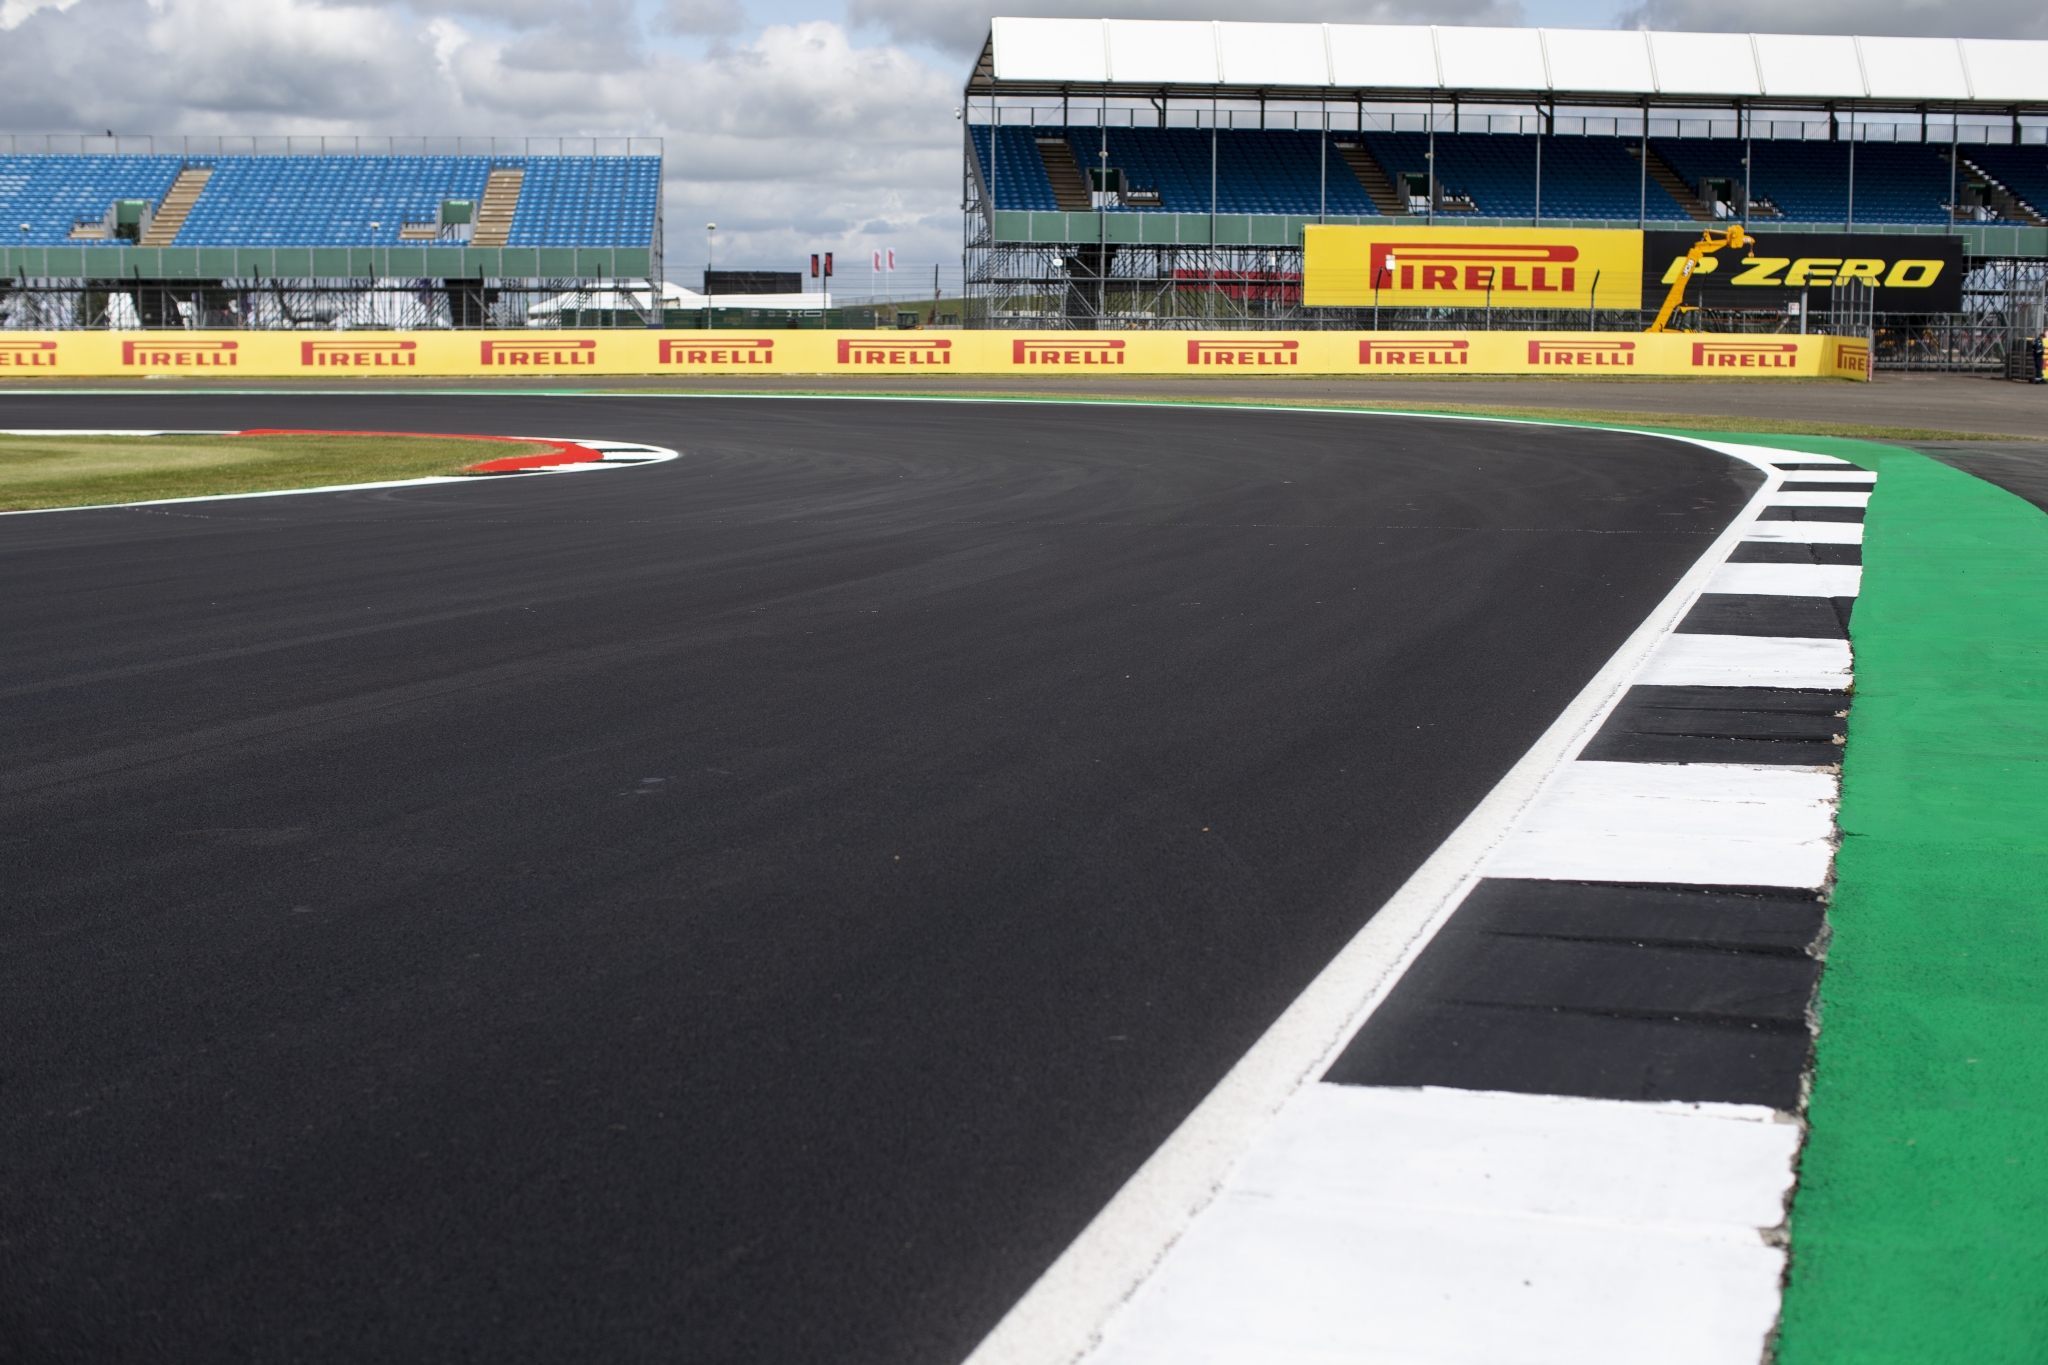 Will there be a British grand prix in 2020?